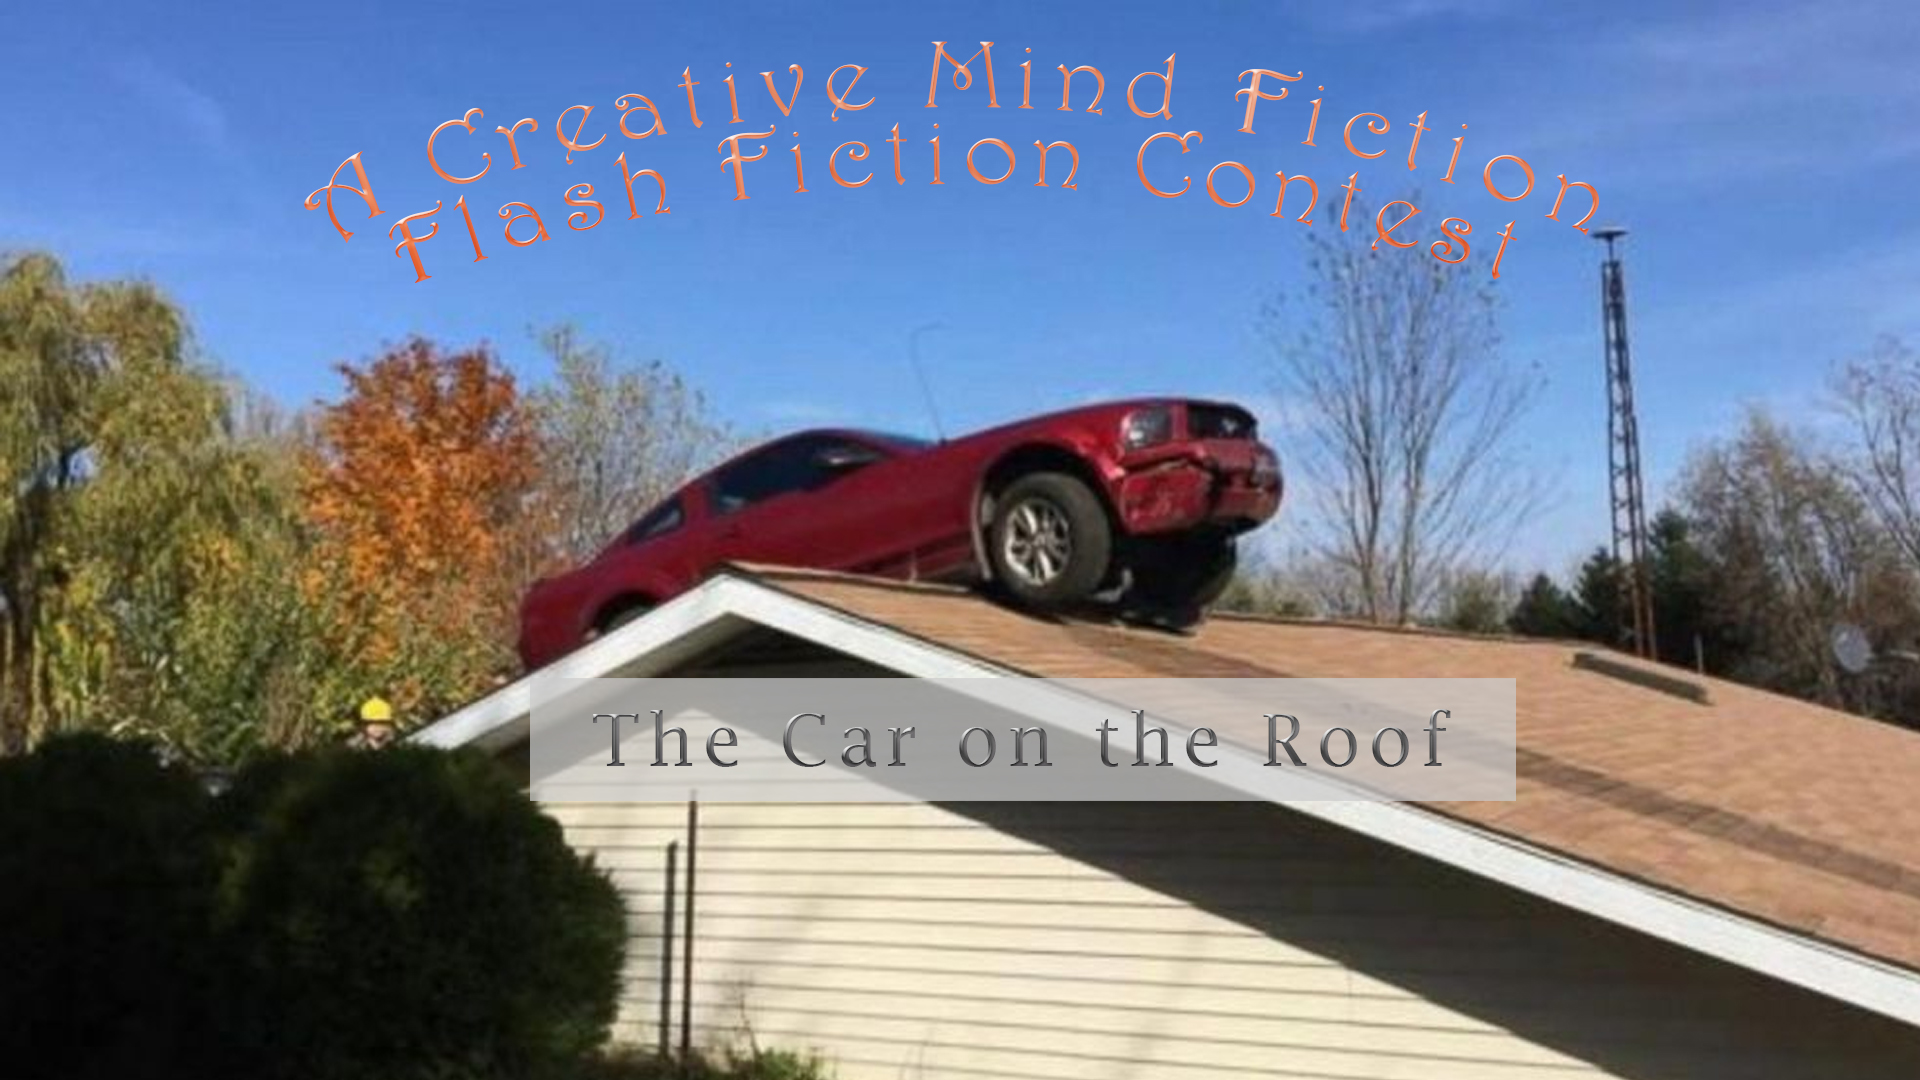 1st Line Writing Prompt “The Car on the Roof”